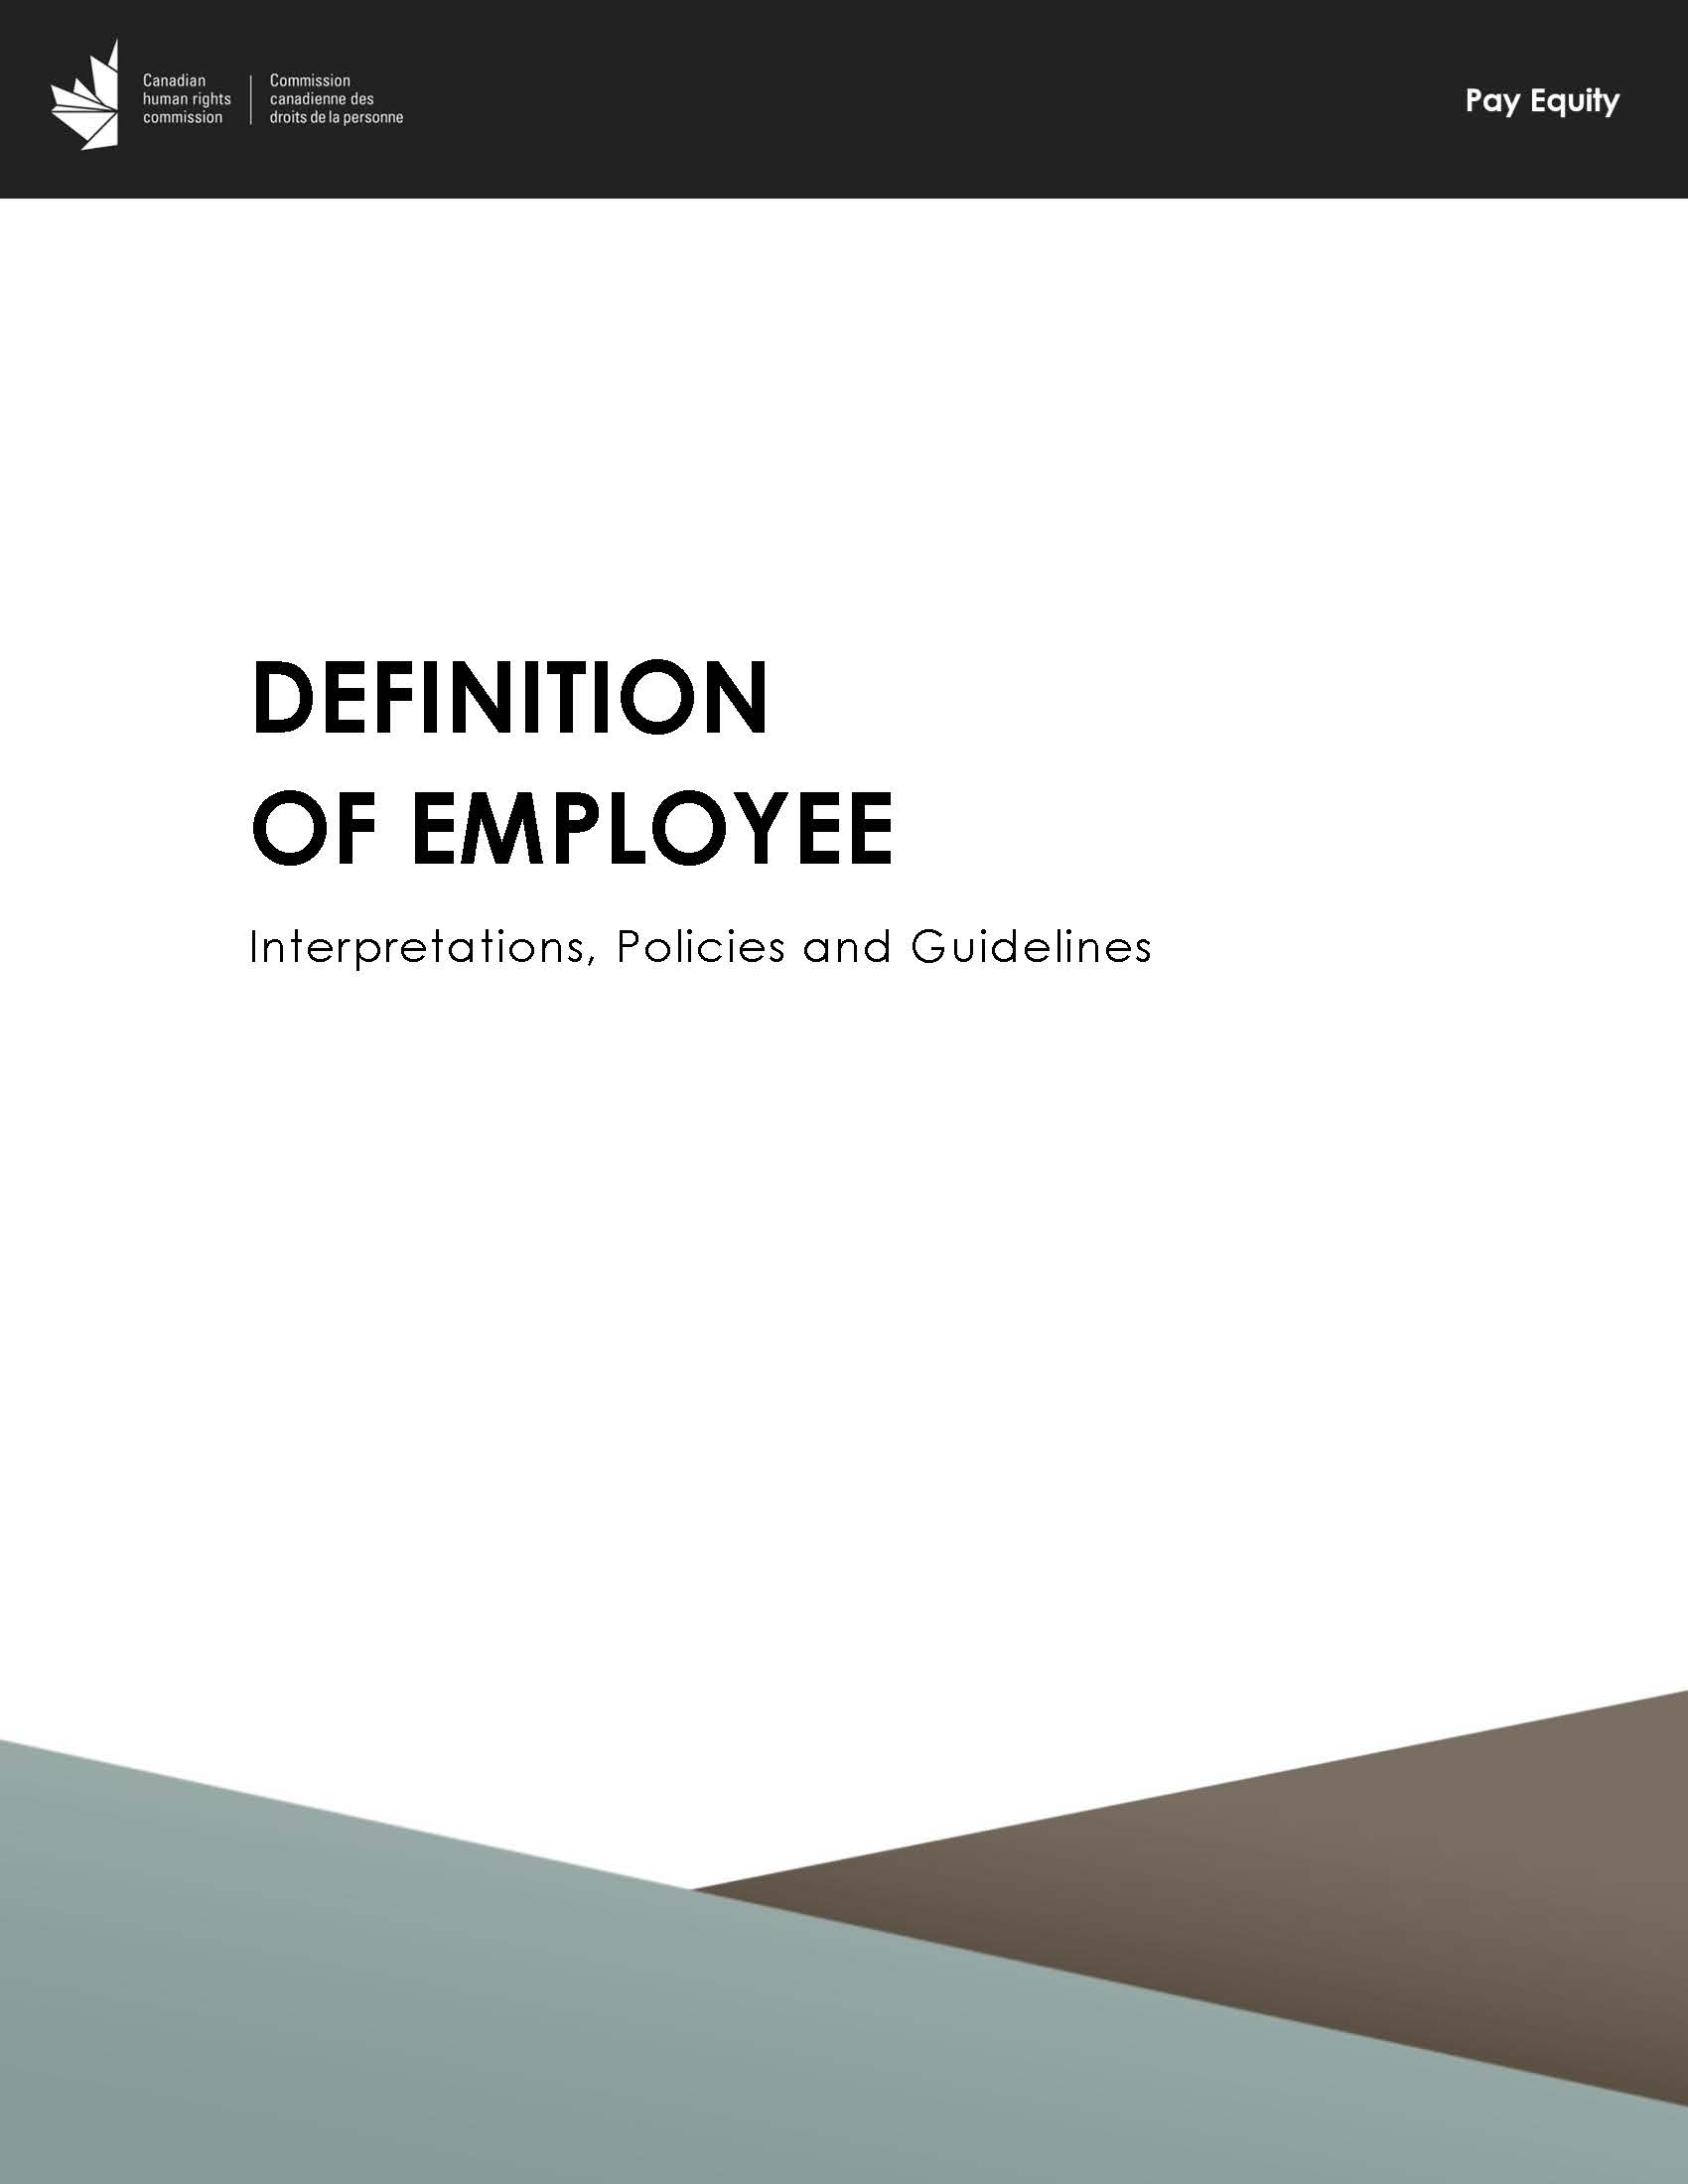 Definition of Employee